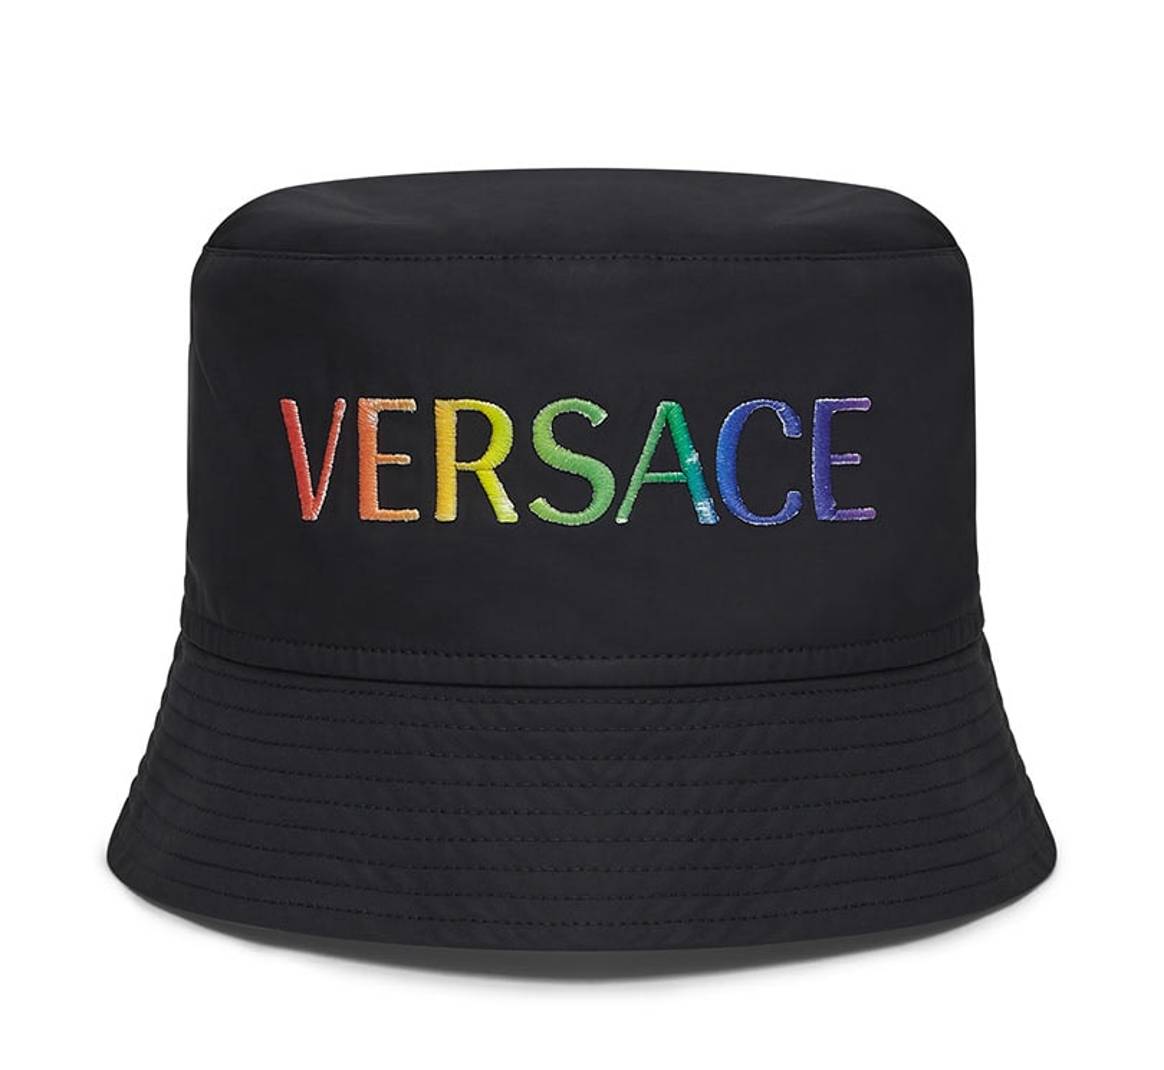 Versace launches Pride collection